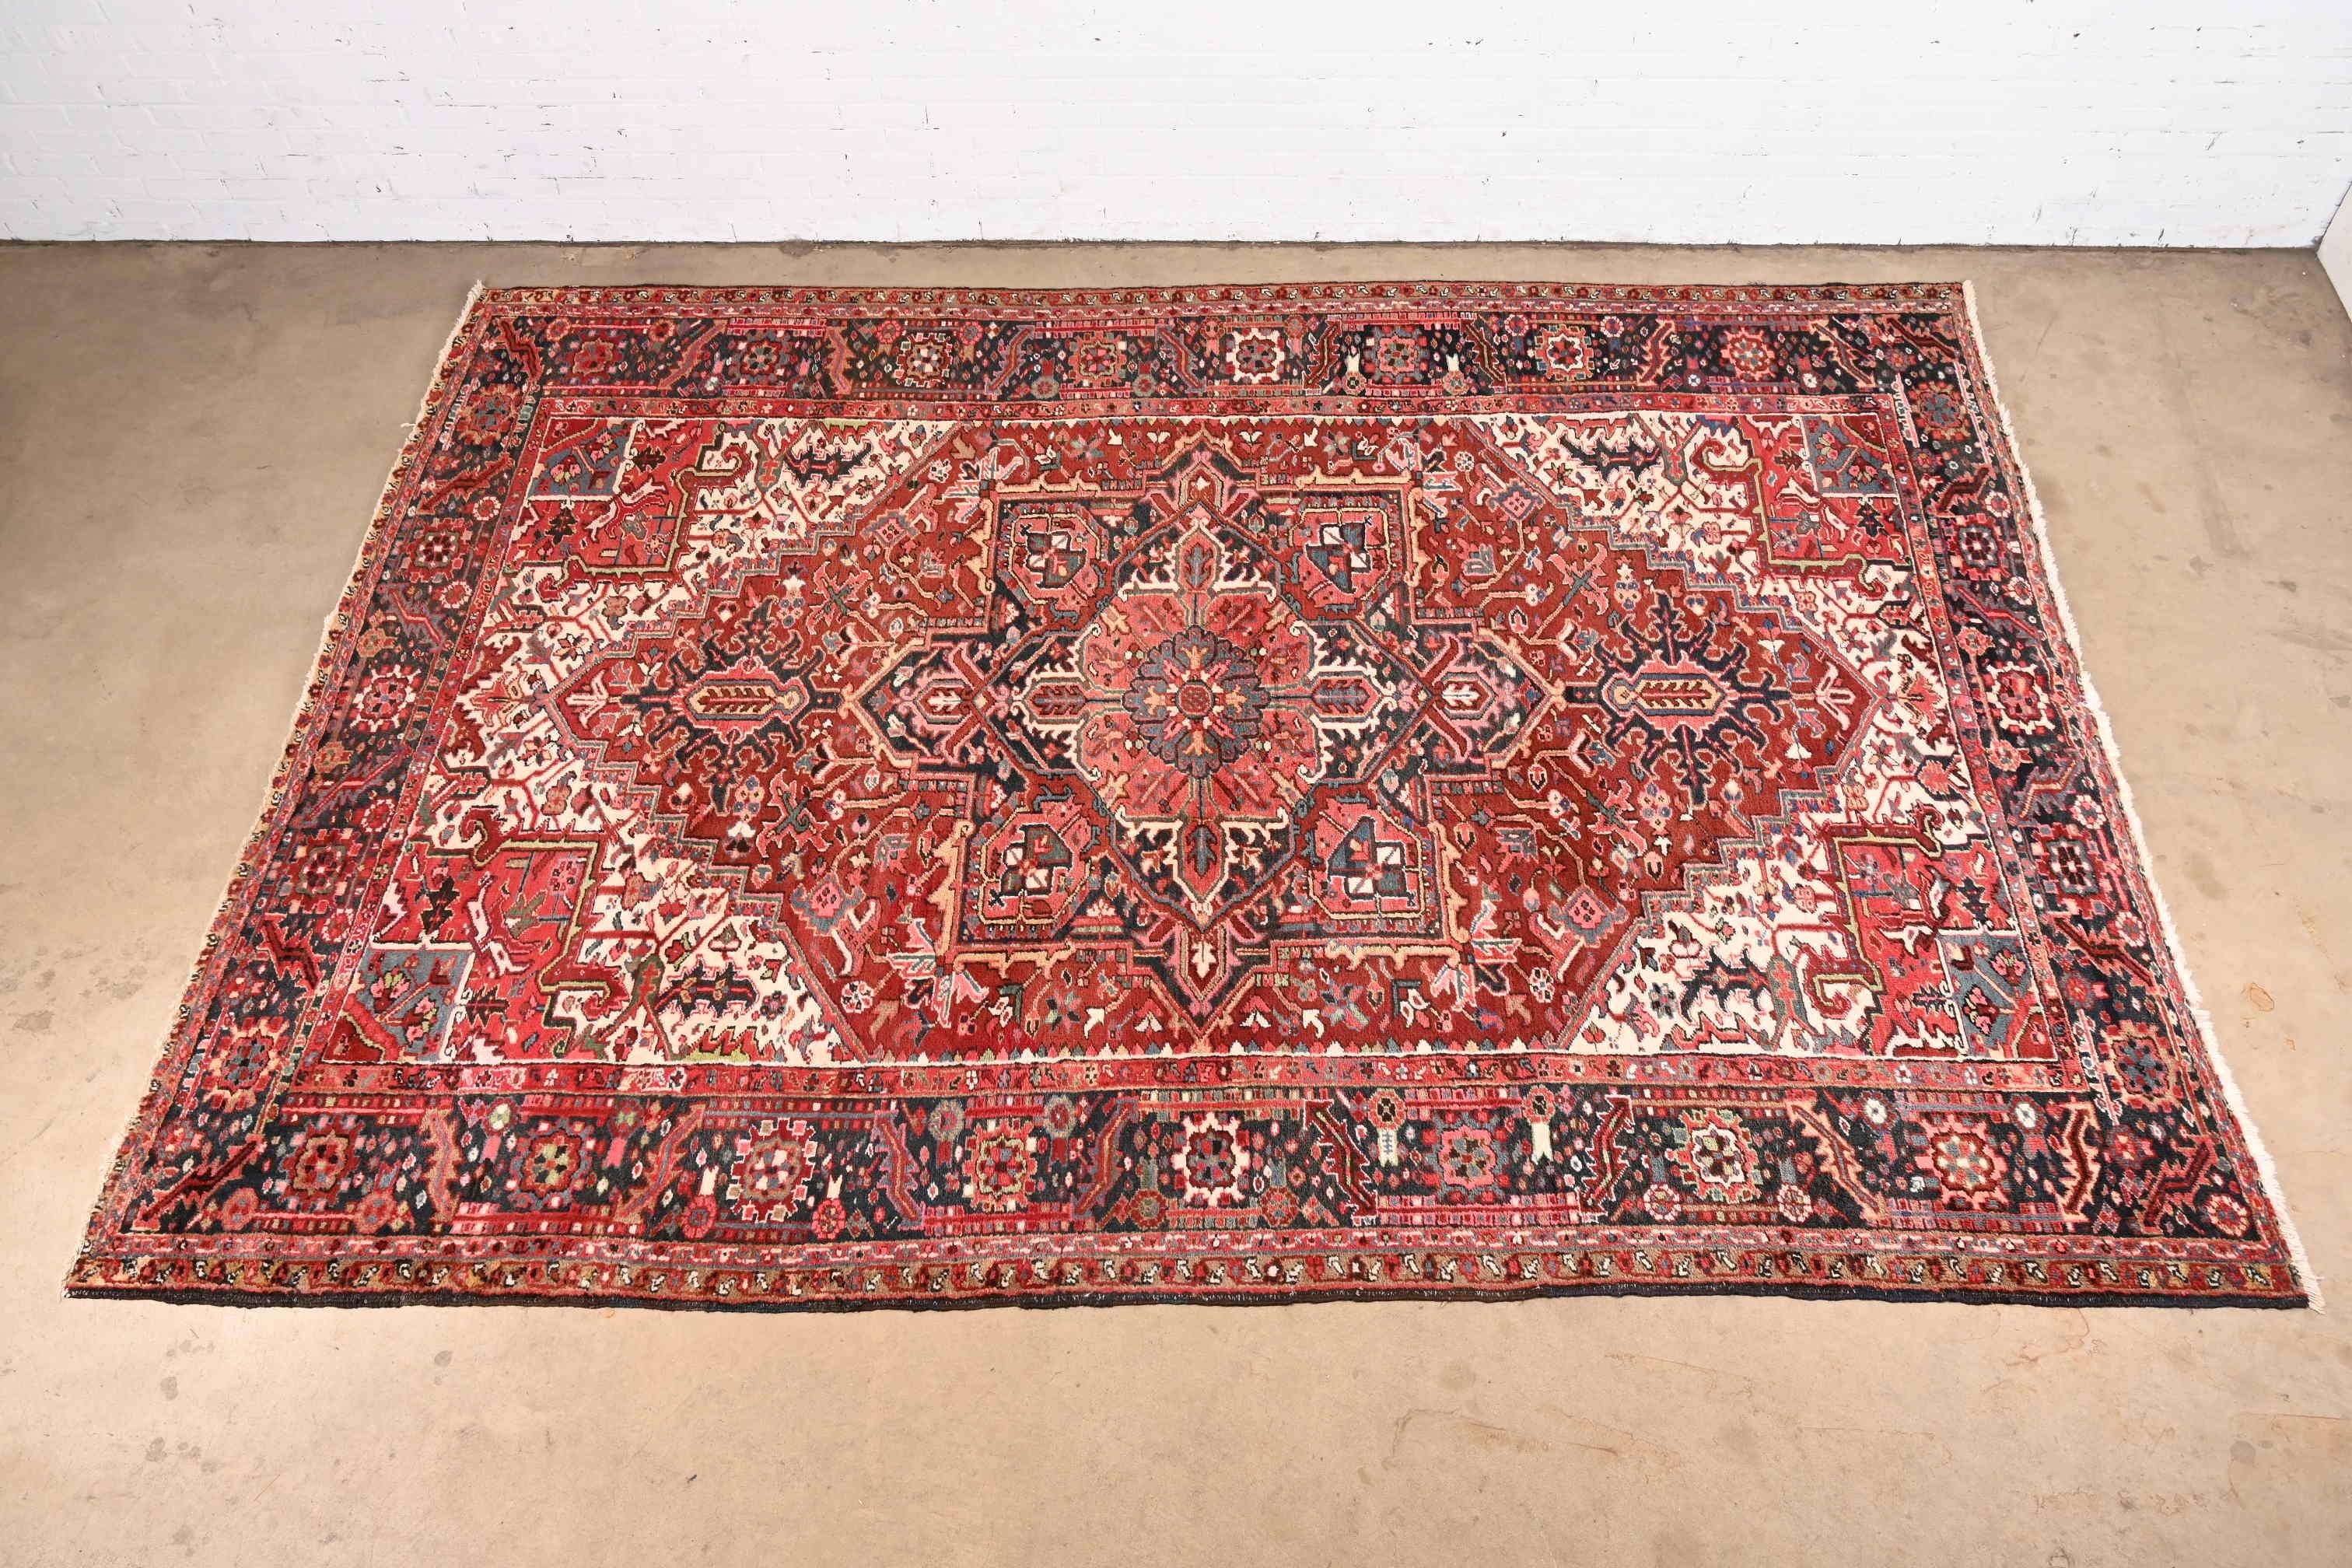 A gorgeous vintage hand knotted Persian Heriz room Size rug

circa 1940s

Classic geometric floral design, with predominant colors in red, blue, and ivory.

Measures: 8'9